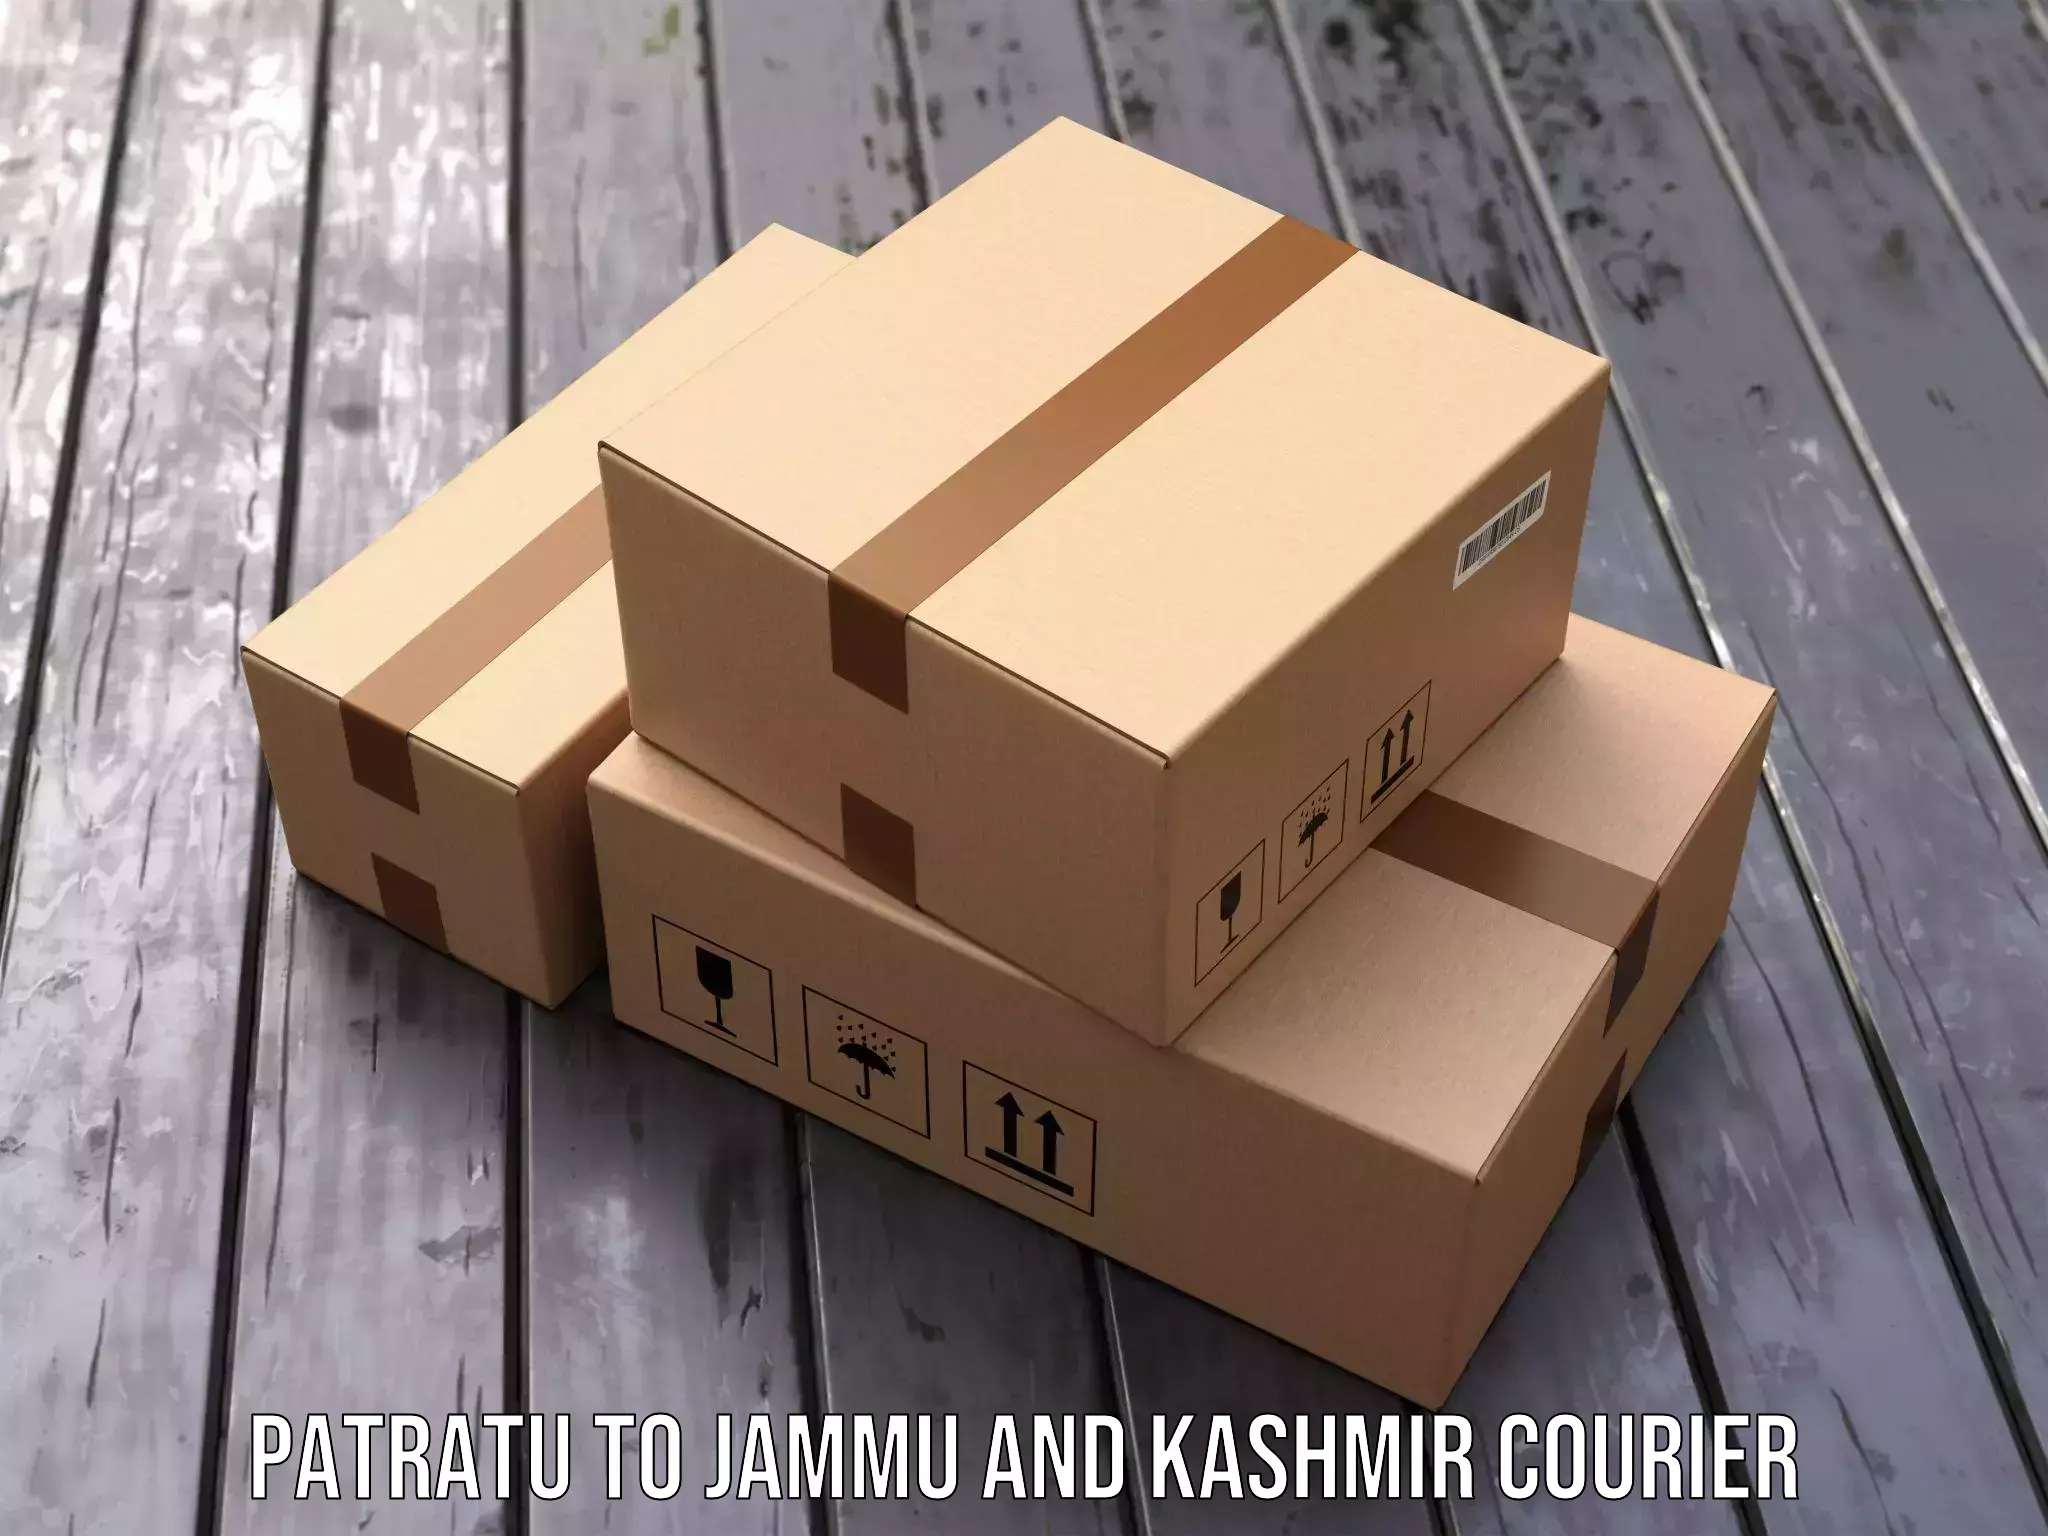 On-call courier service Patratu to Jammu and Kashmir